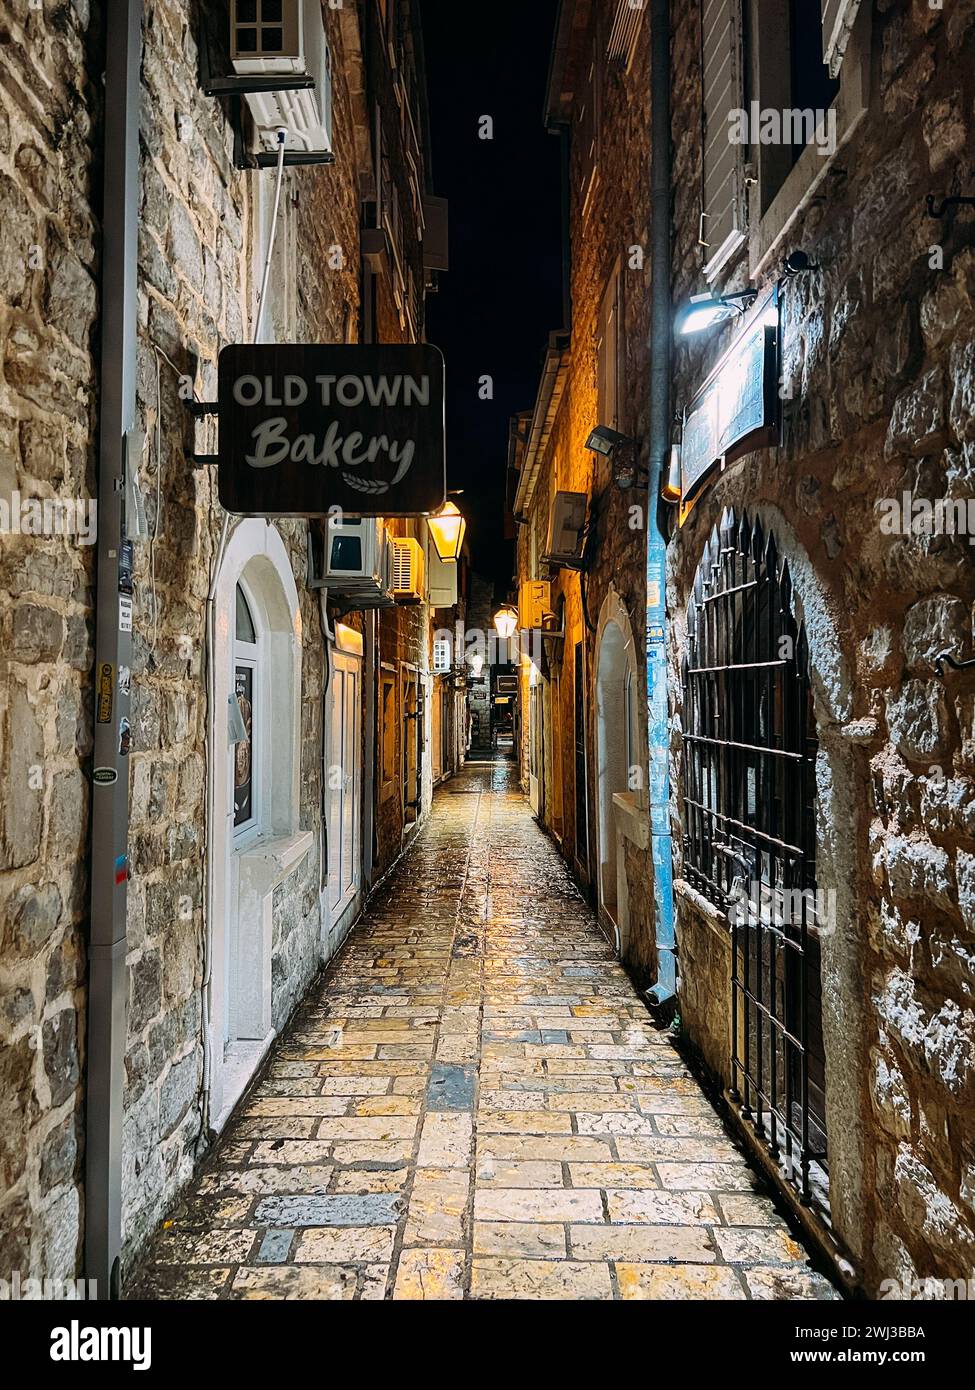 Budva, Montenegro - 25 december 2022: Signboard on a narrow street with stone houses. Caption: Old Town Bakery Stock Photo